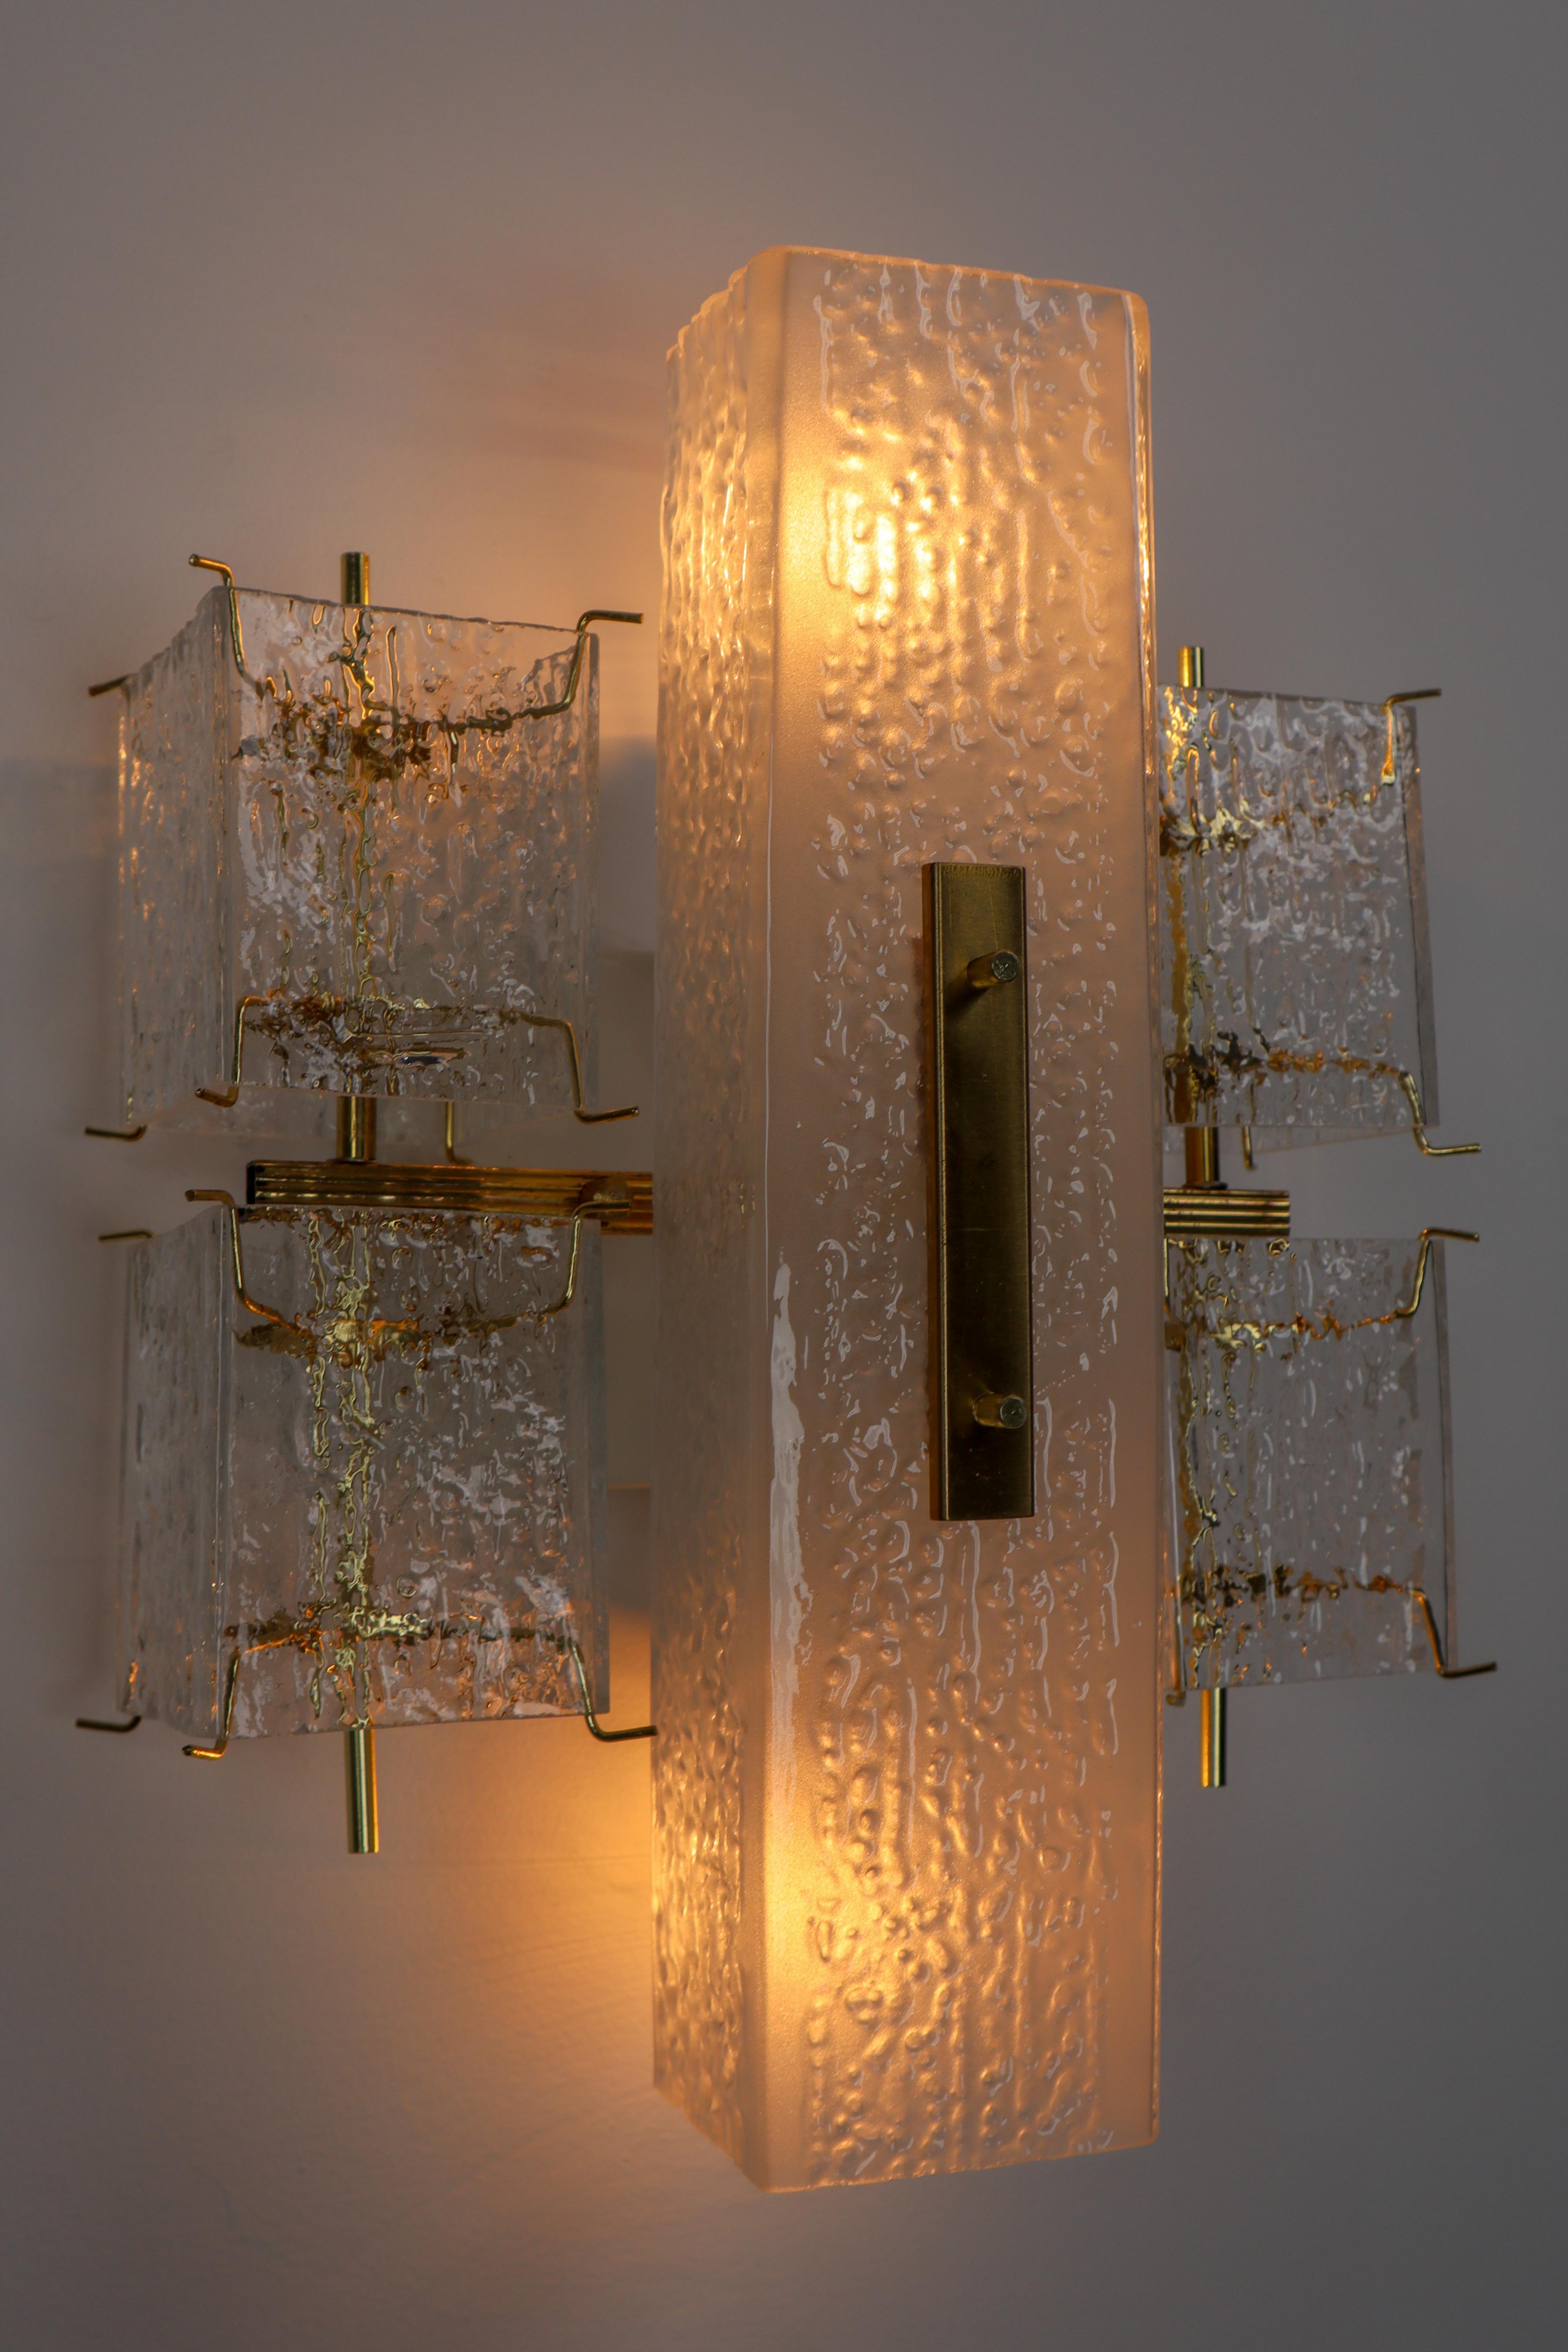 1 of 8 Midcentury Wall Lights with Structured Glass and Brass, Europe, 1970s For Sale 3